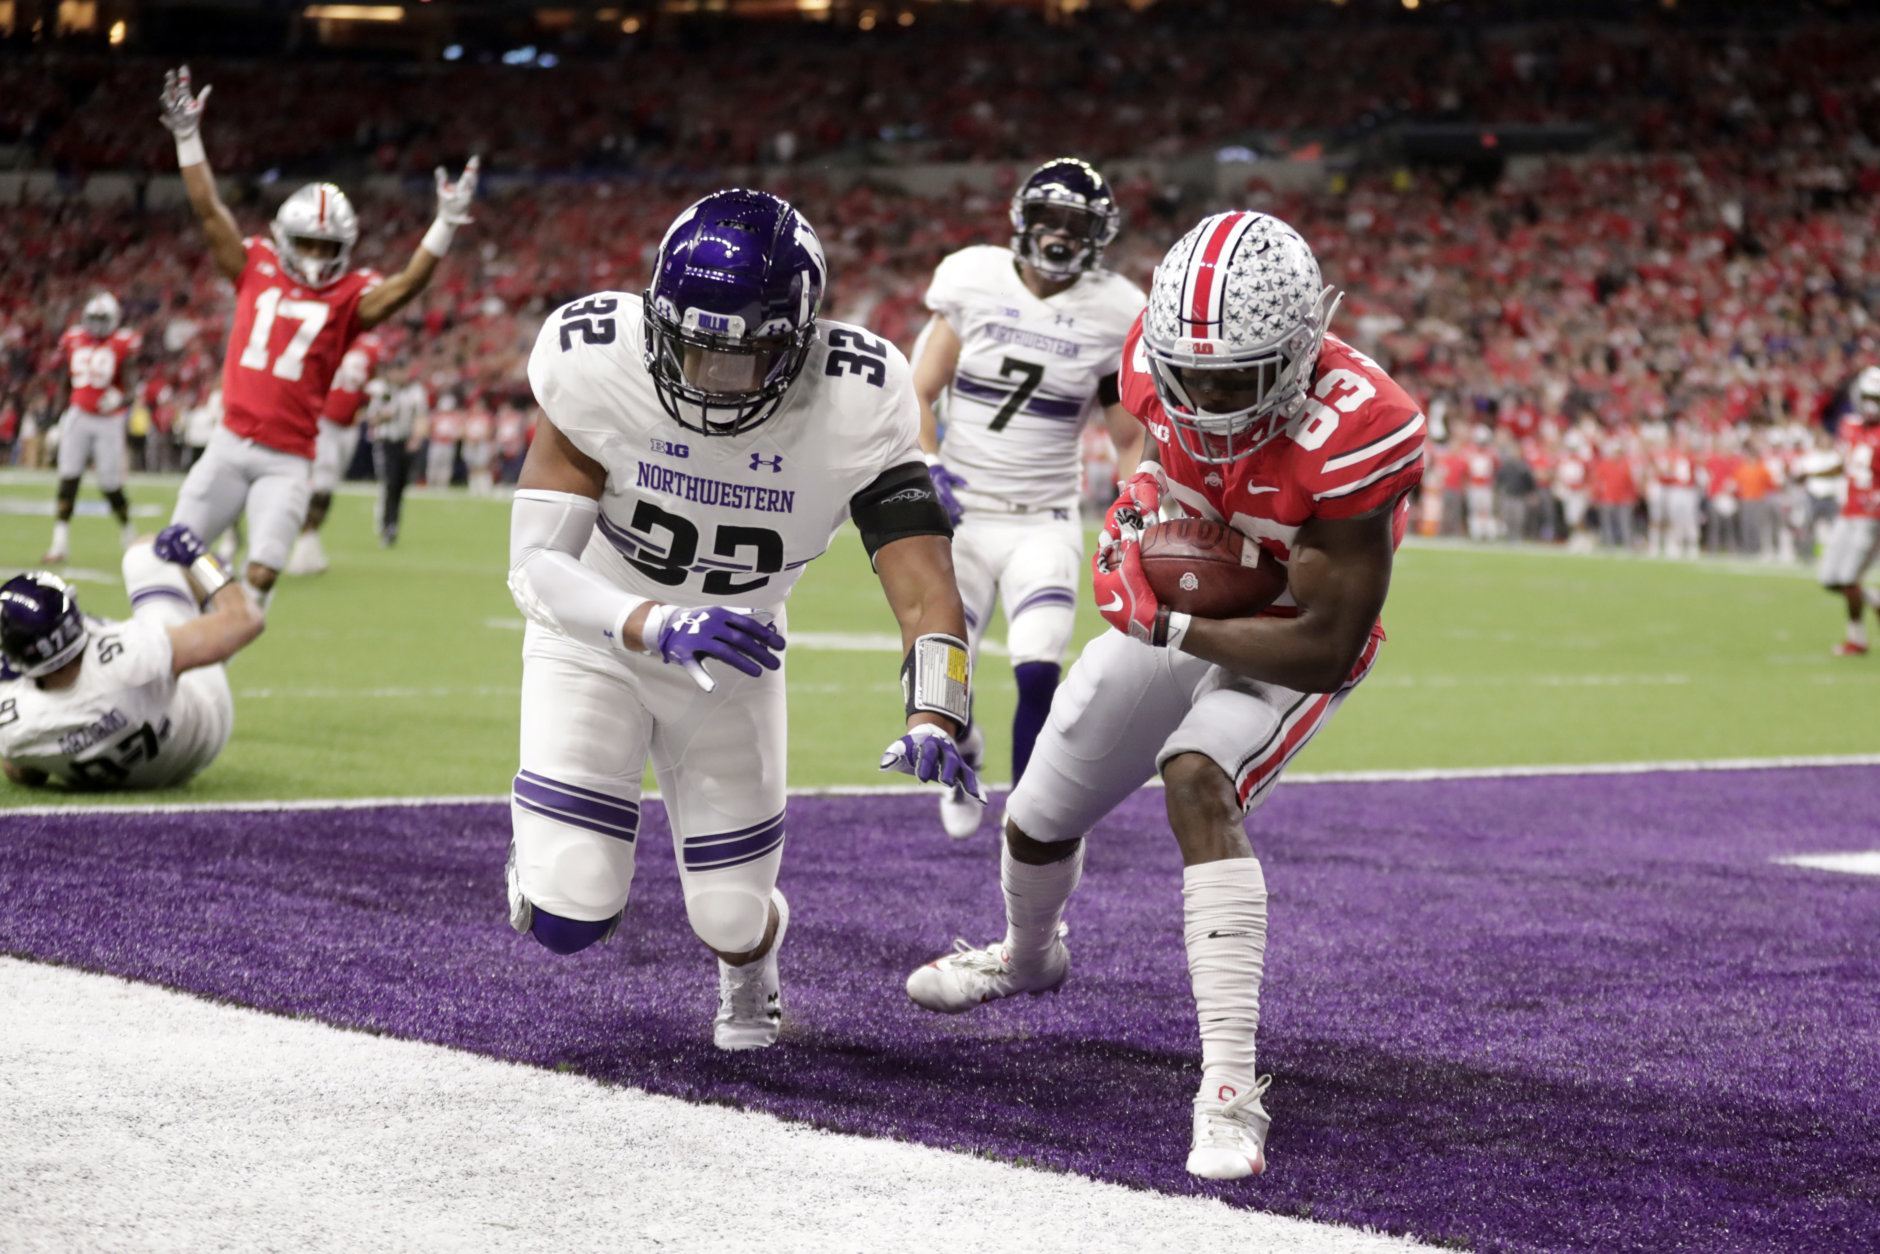 Ohio State's Terry McLaurin (83) makes a touchdown reception against Northwestern's Nate Hall (32) during the first half of the Big Ten championship NCAA college football game, Saturday, Dec. 1, 2018, in Indianapolis. (AP Photo/Michael Conroy)